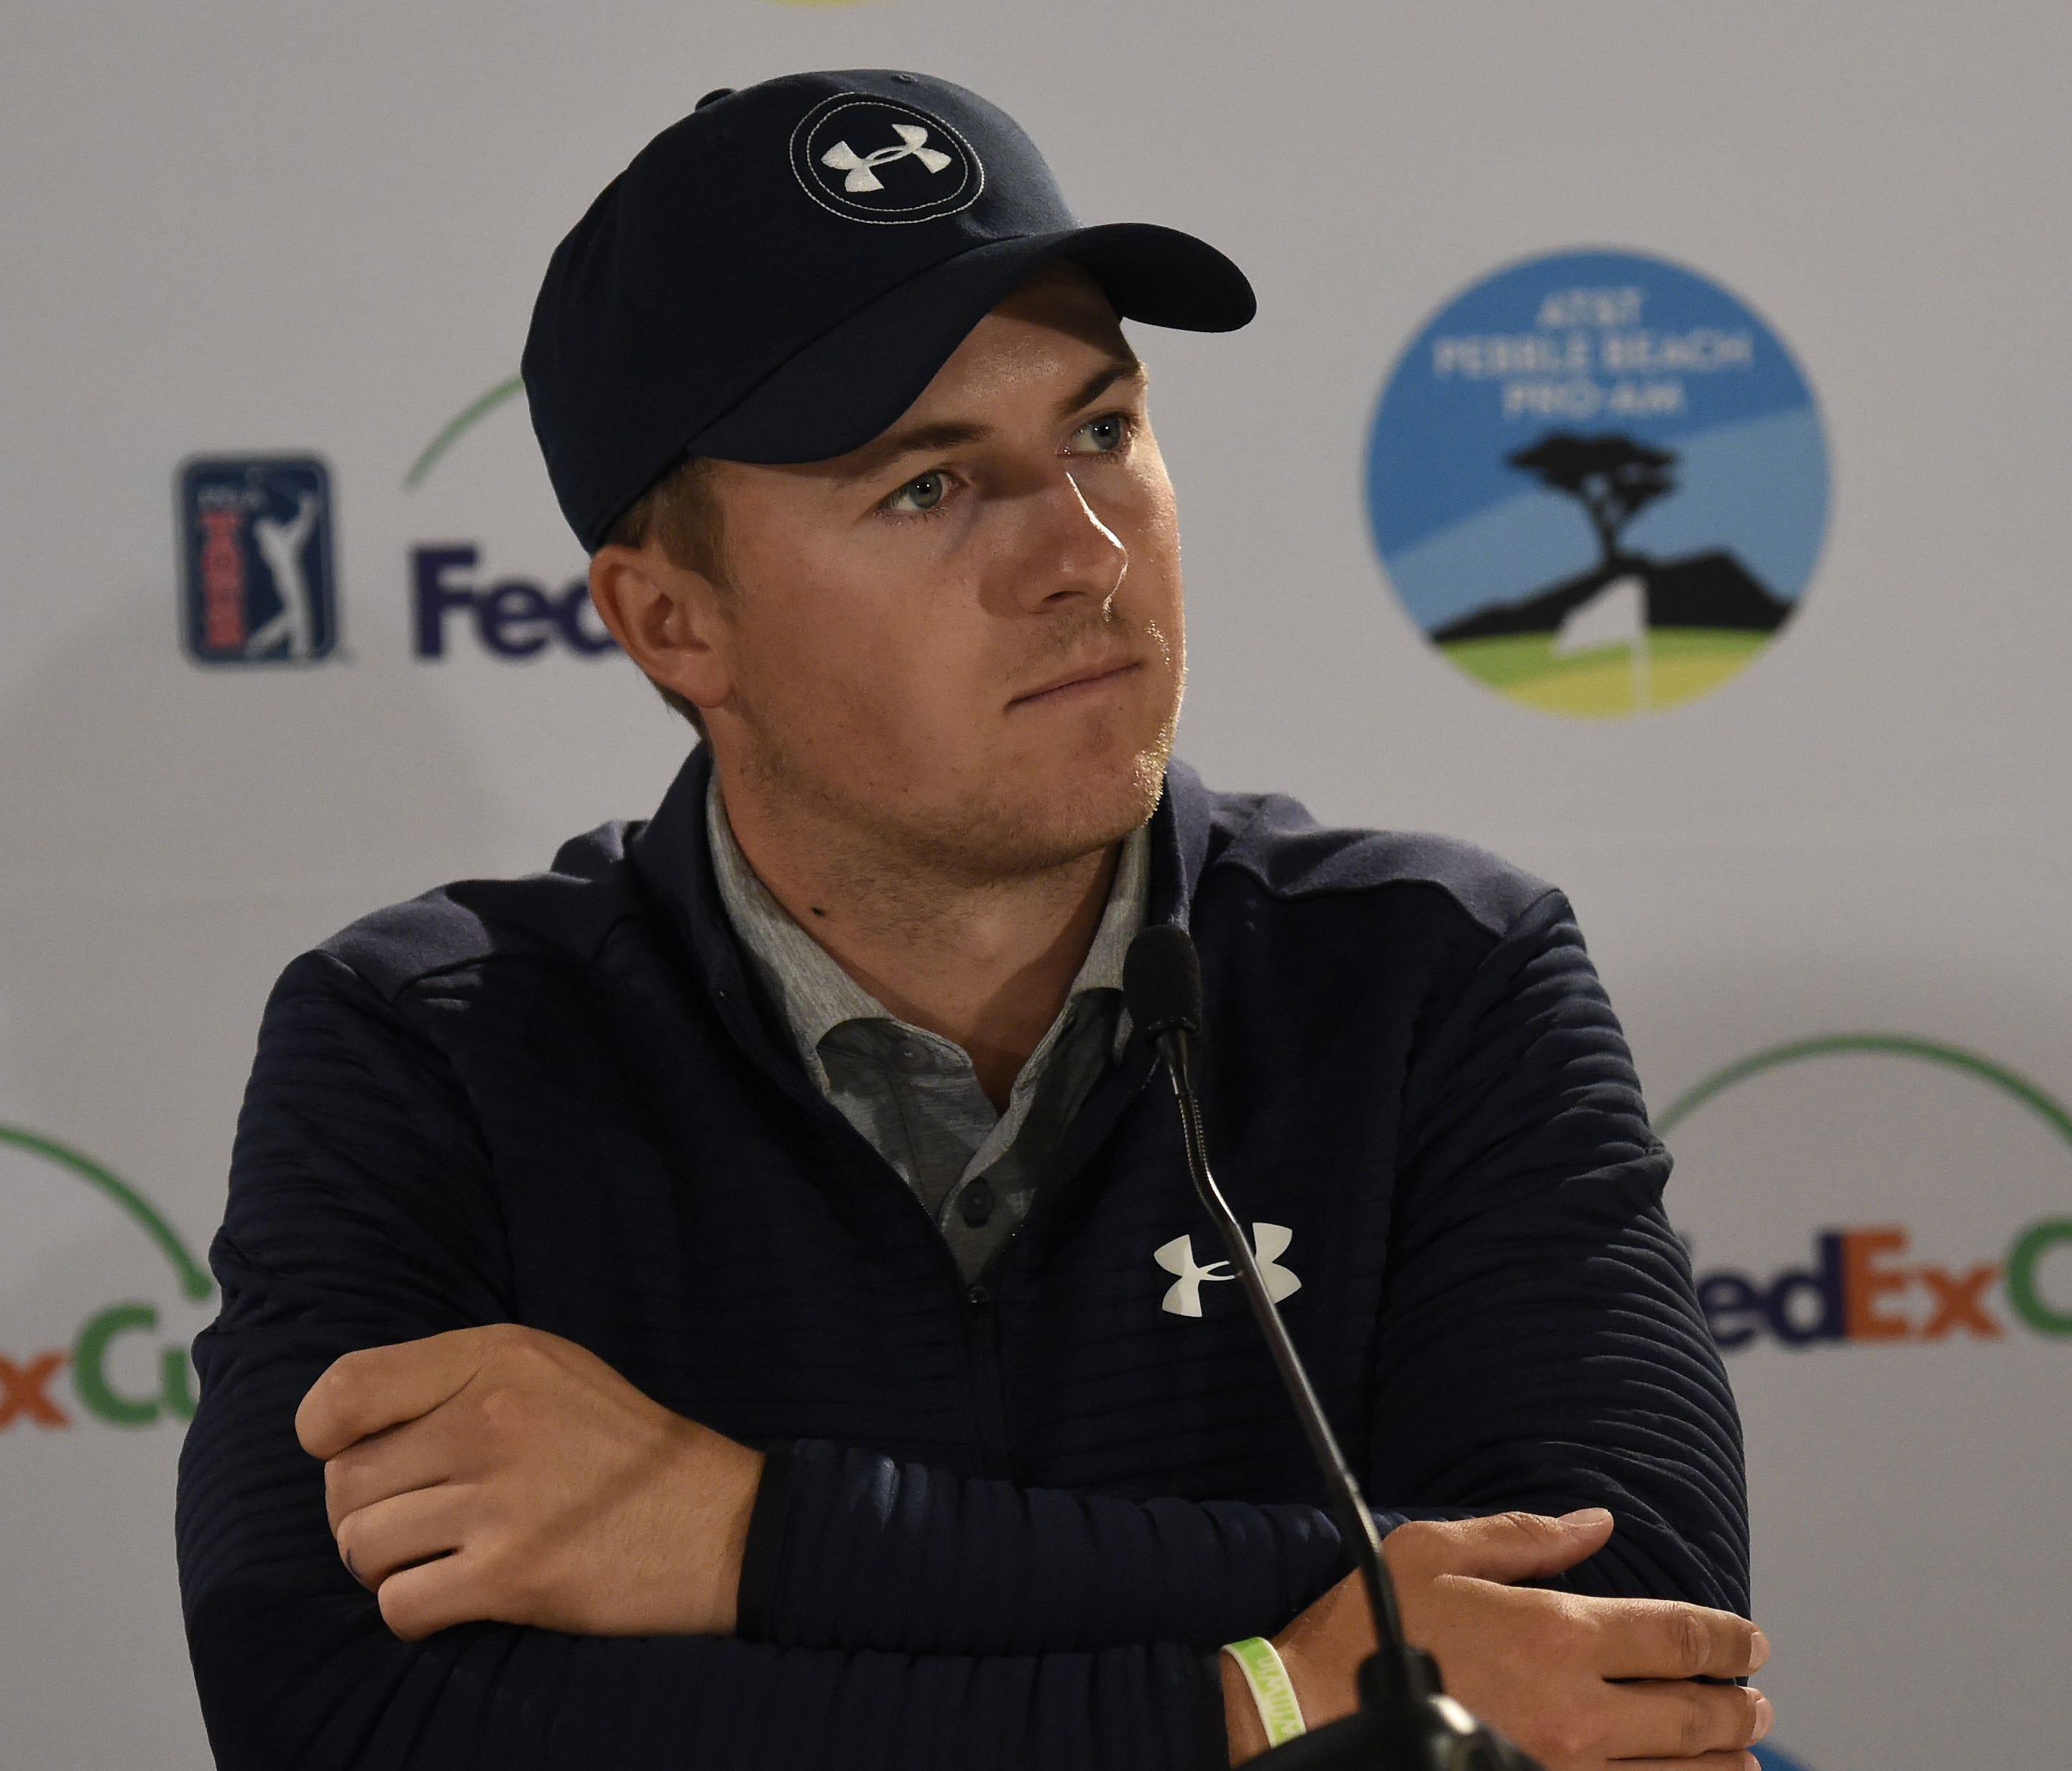 Jordan Spieth talks during a pre-tournament press conference for the AT&T Pebble Beach Pro-Am at Pebble Beach Golf Links on Feb. 8.